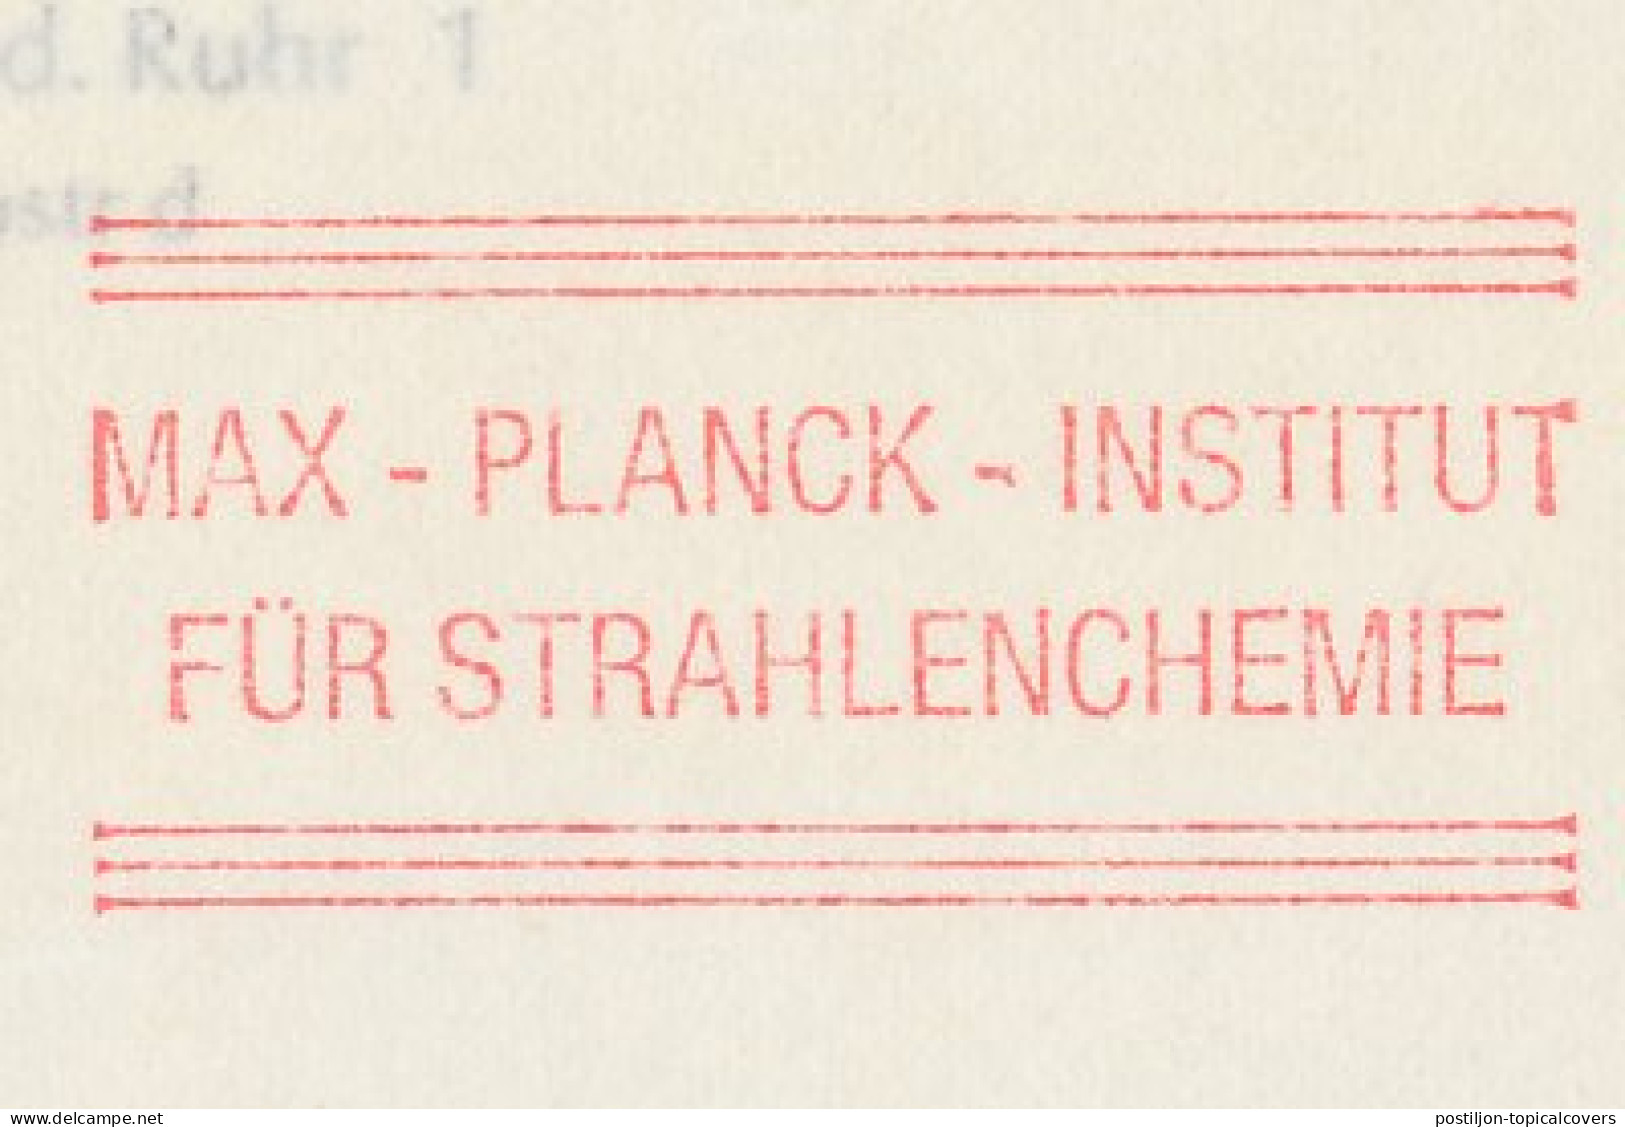 Meter Top Cut Germany 1984 Max Planck - Radiation Chemistry - Chimica